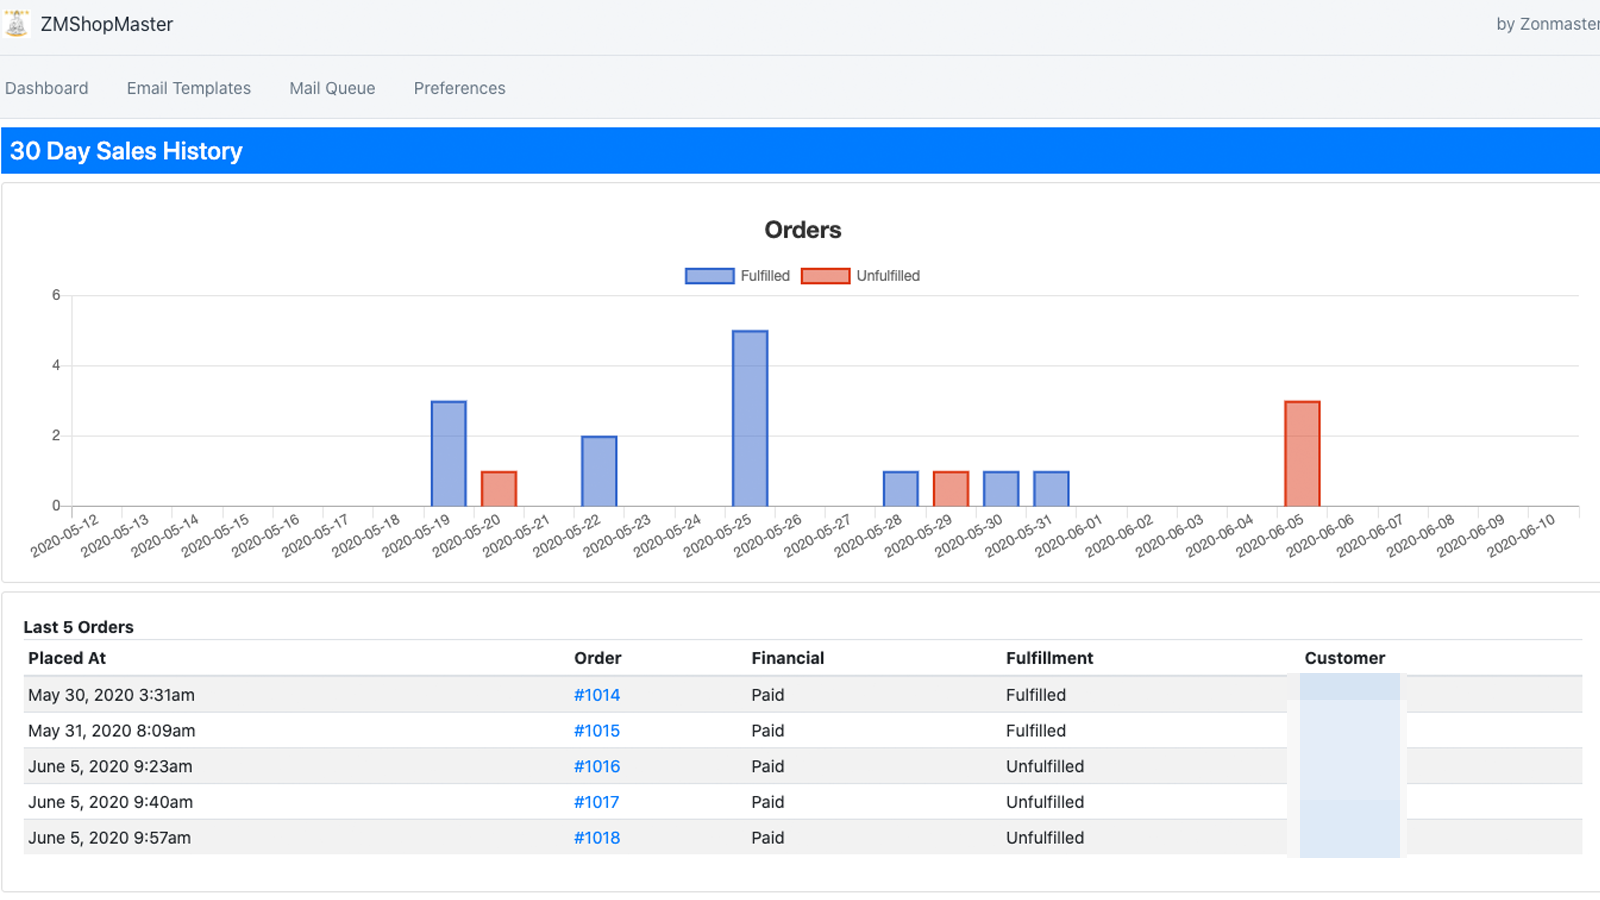 Dashboard showing orders and status, top products and more!